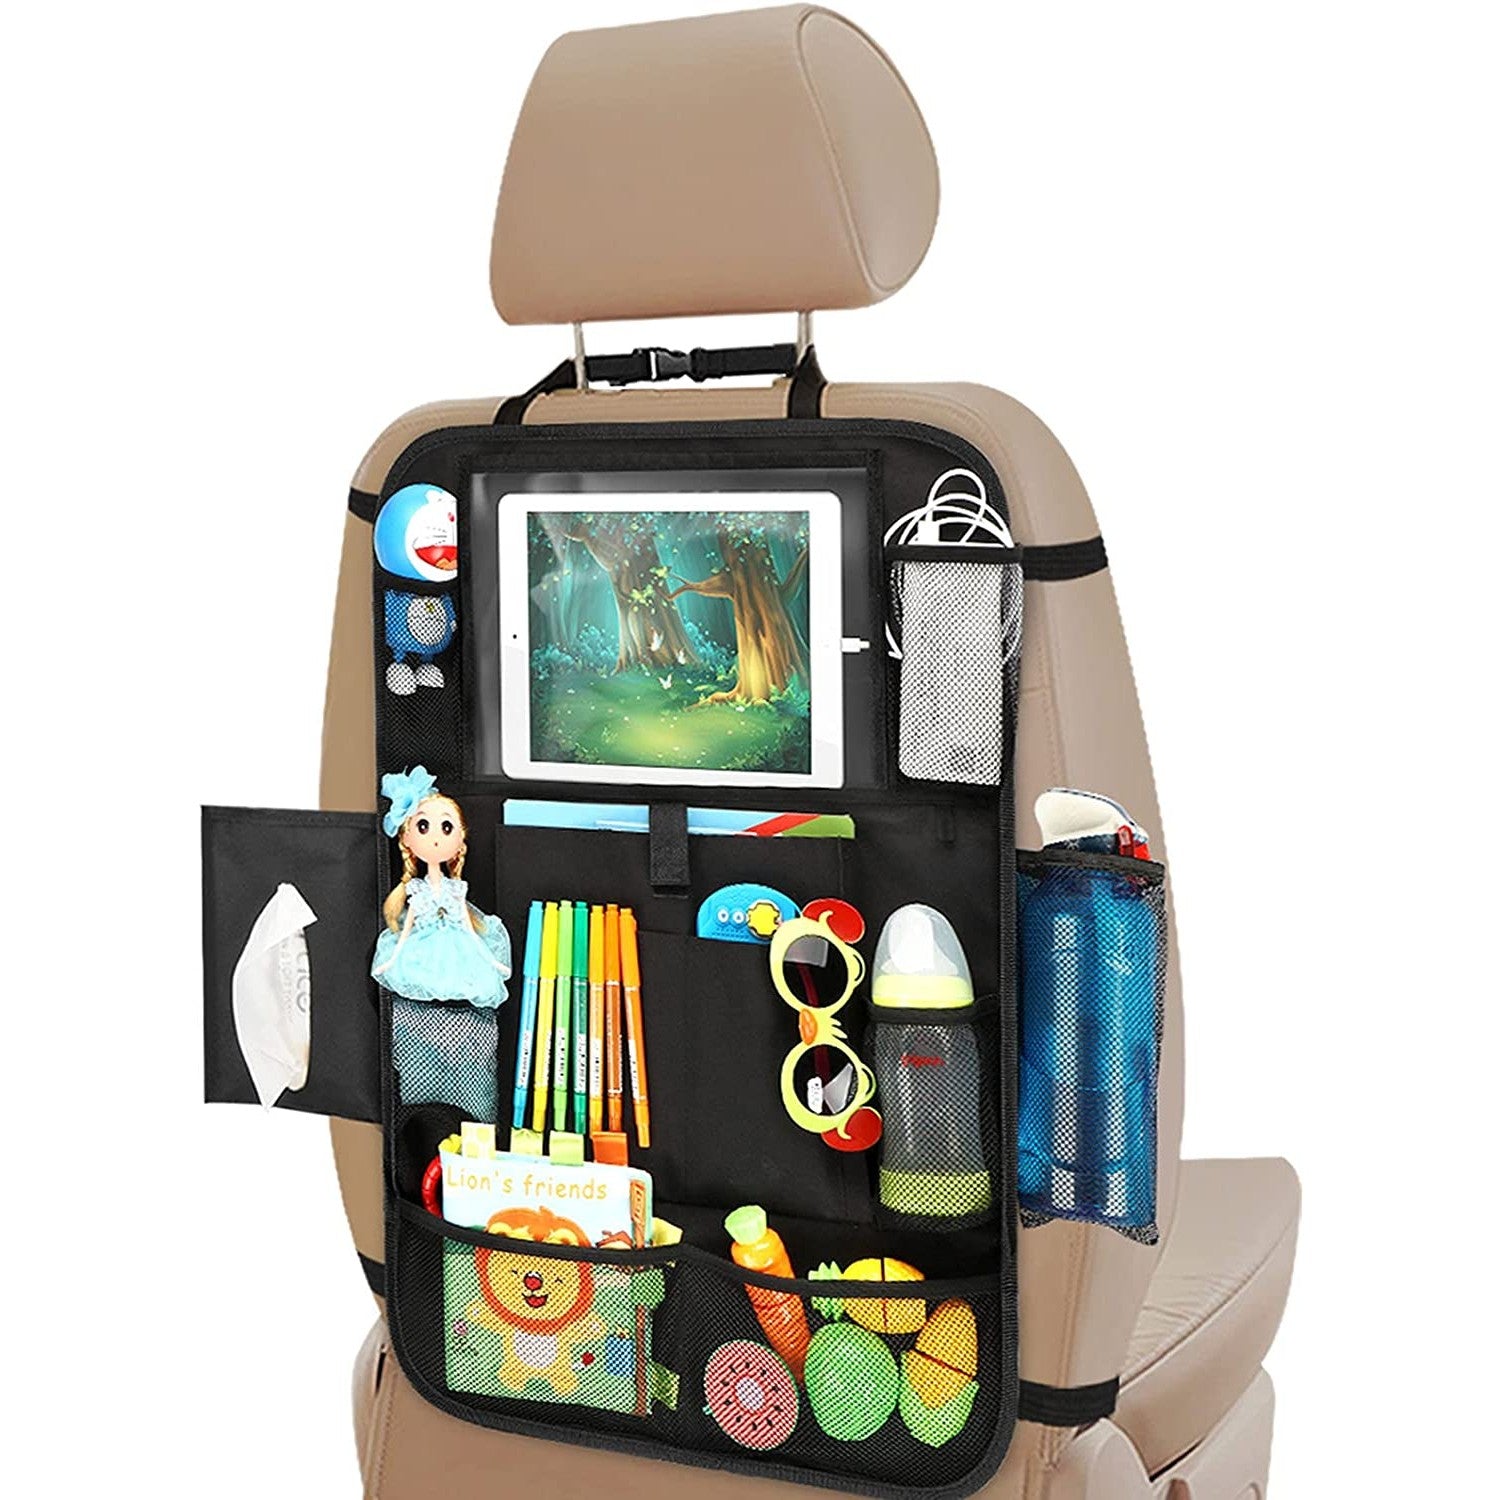 A backseat car organizer strapped to the back of a car seat. The organizer is full of different kids items neatly stored away.